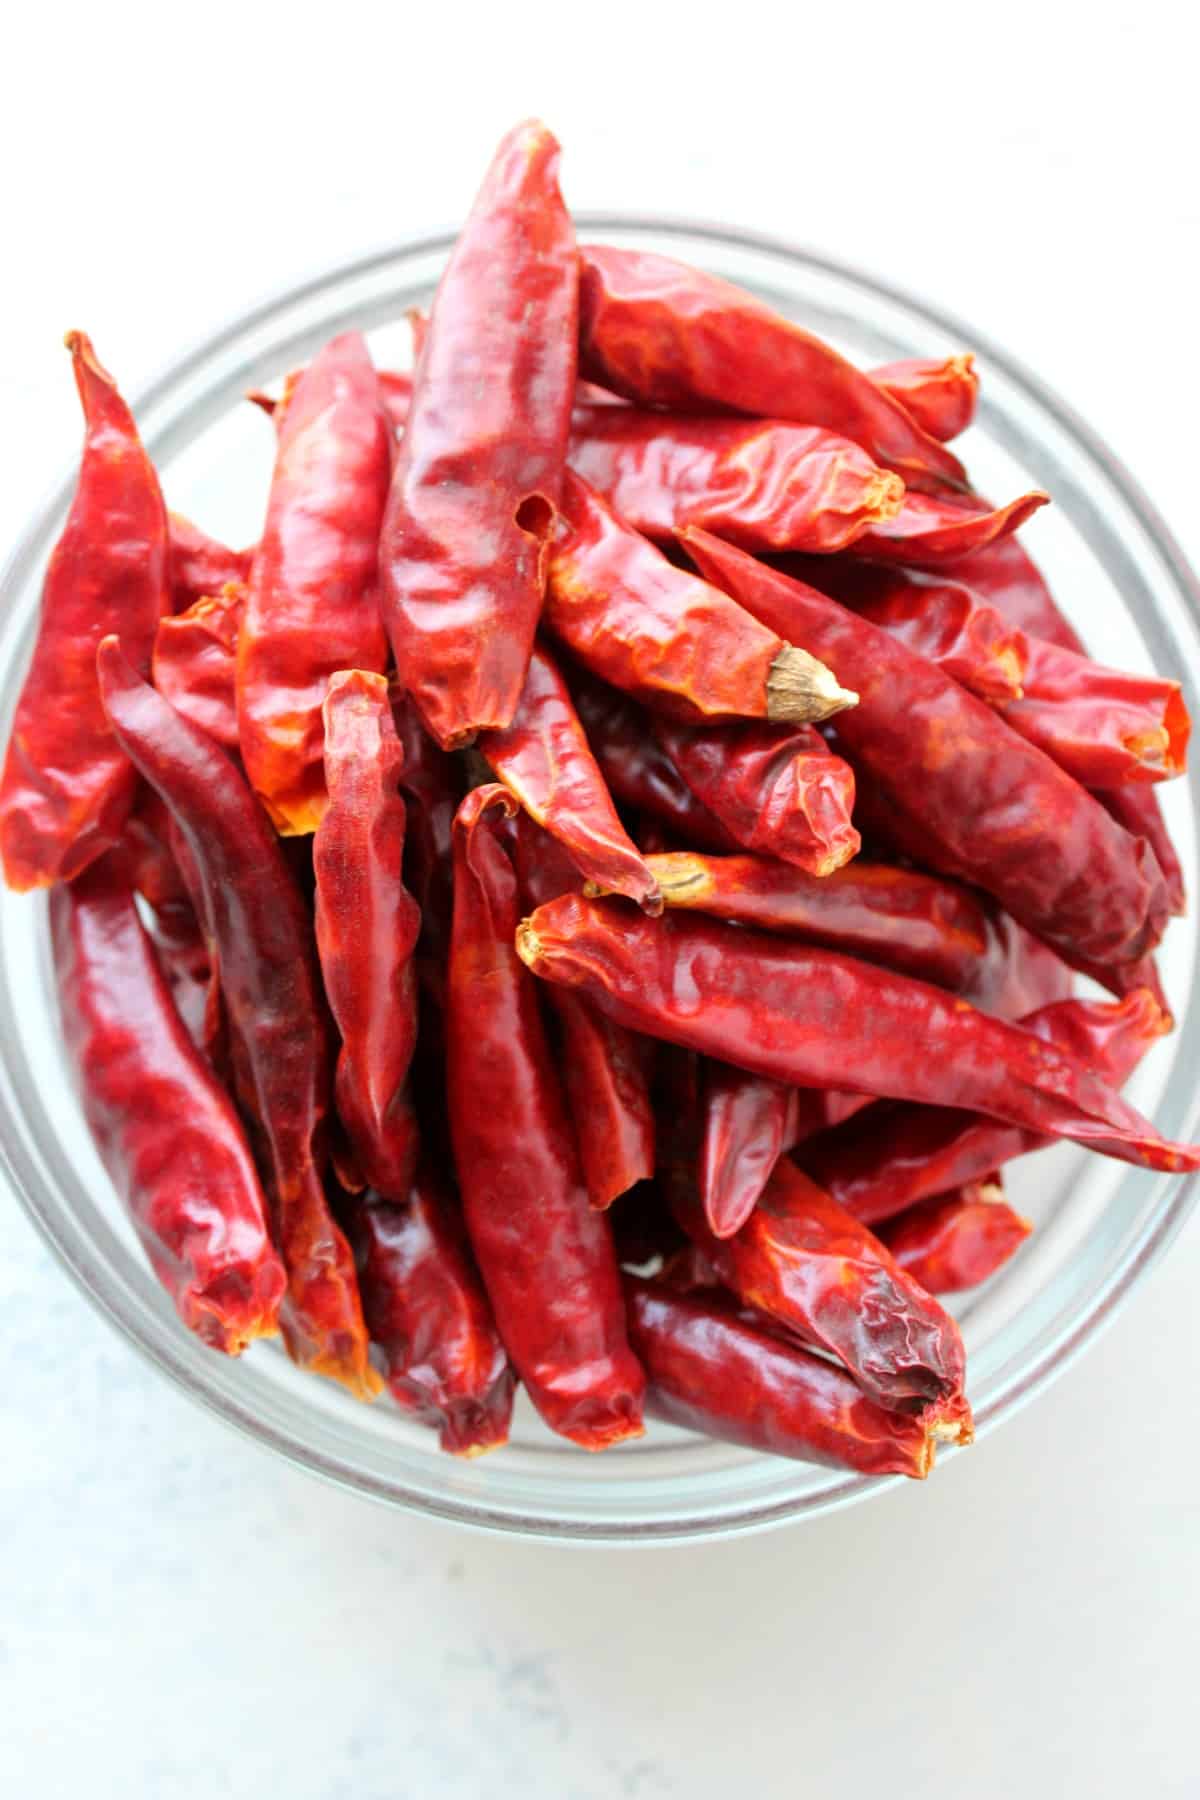 Dried chili peppers in a bowl.